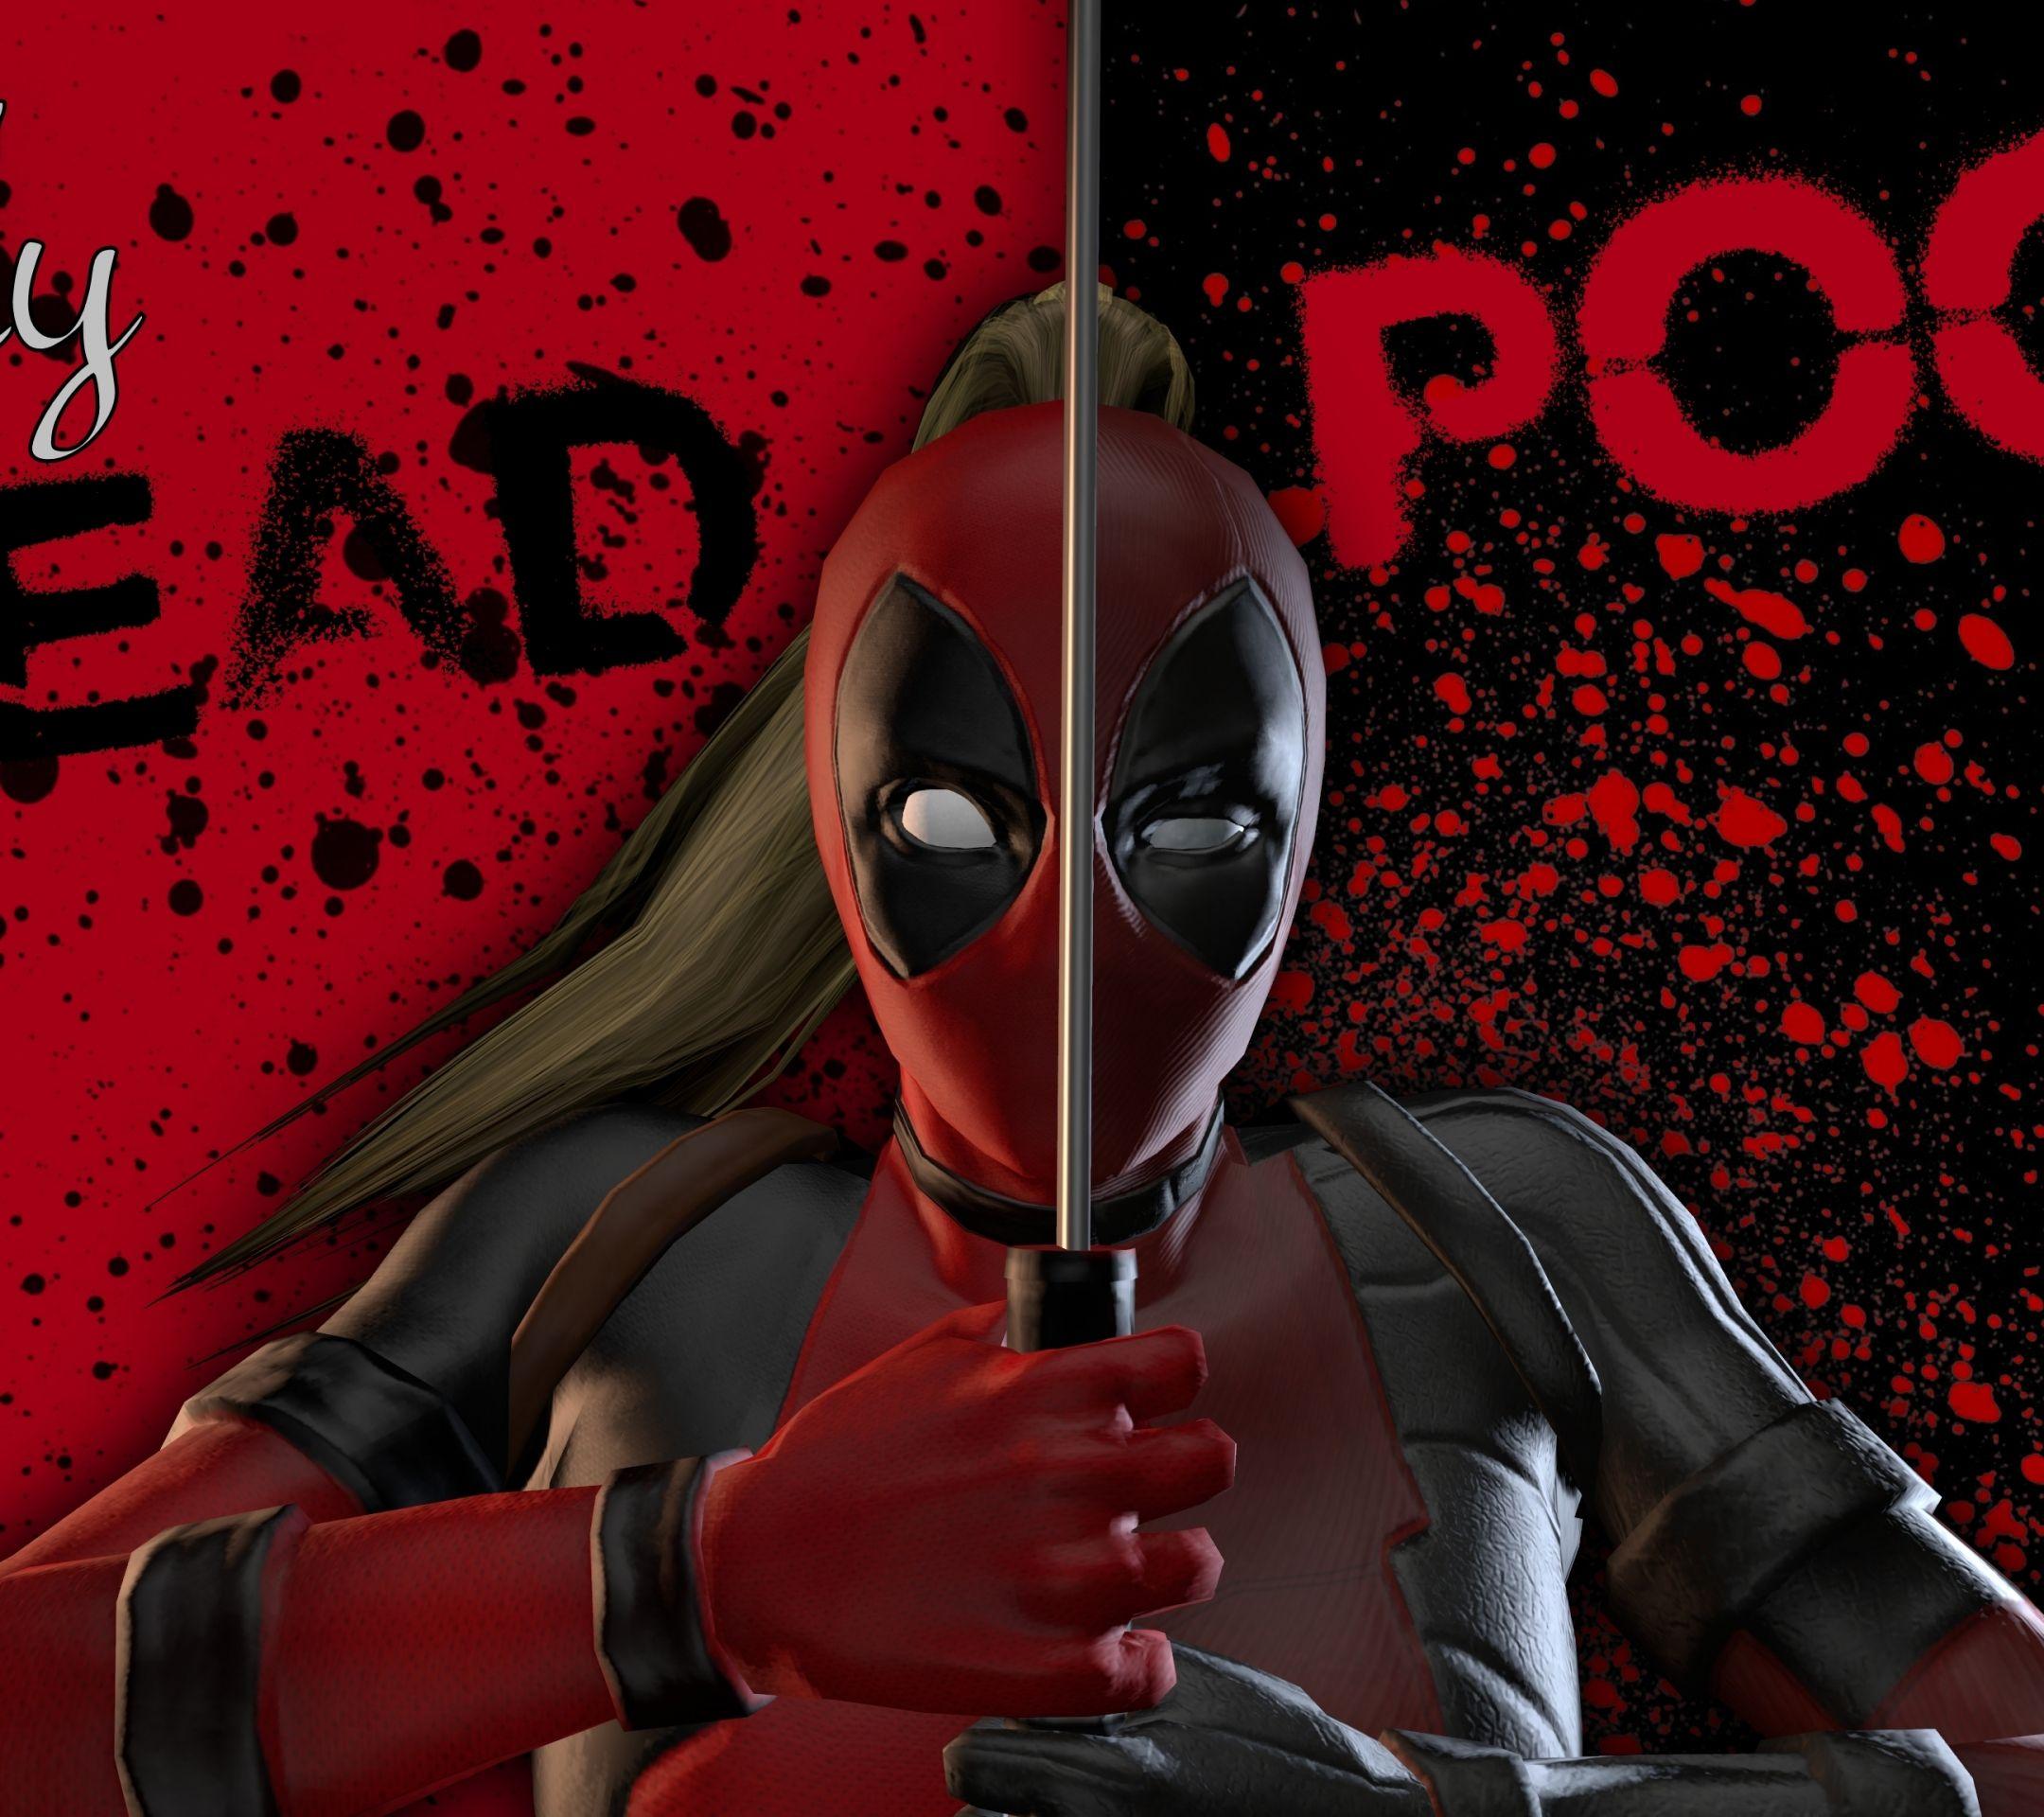 Lady Deadpool Wallpapers - Top Free Lady Deadpool Backgrounds